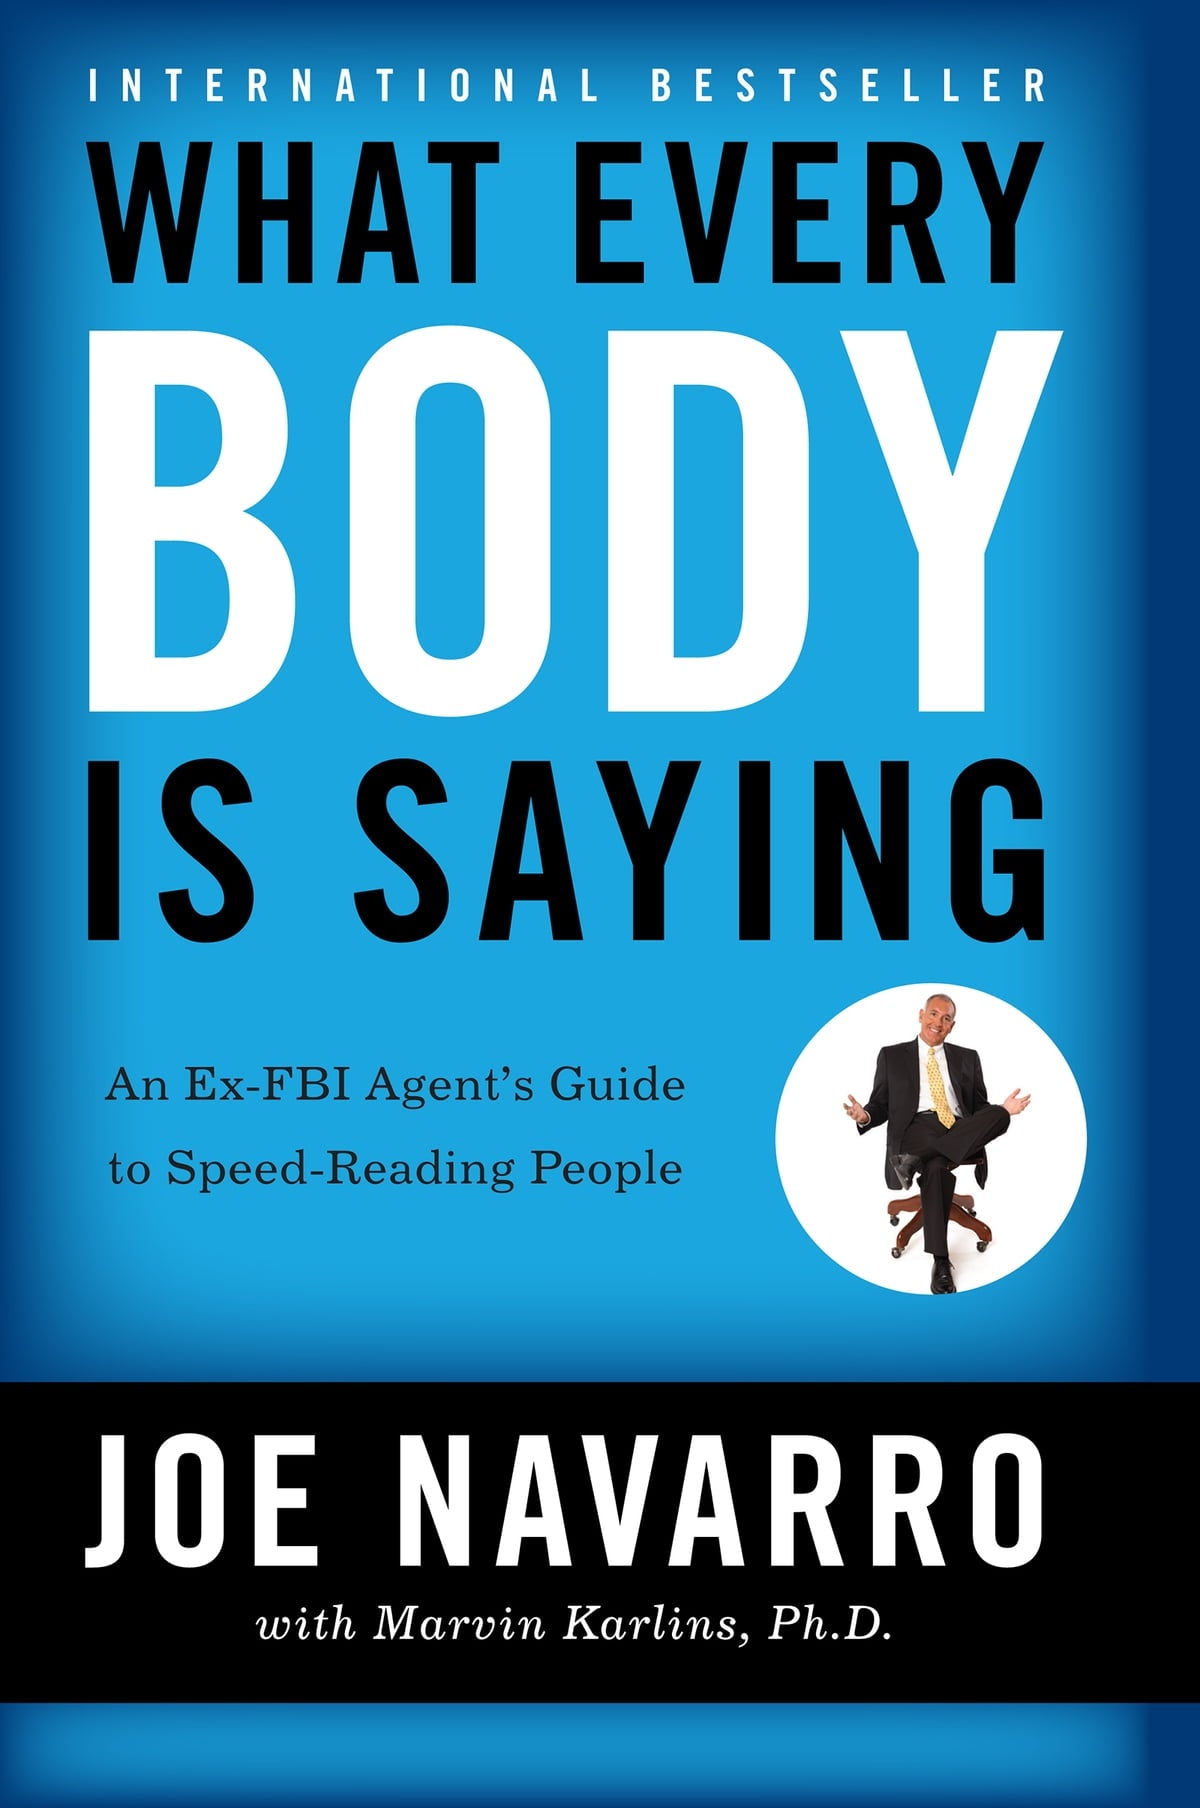 What Every BODY is Saying by Joe Navarro and Marvin Karlins